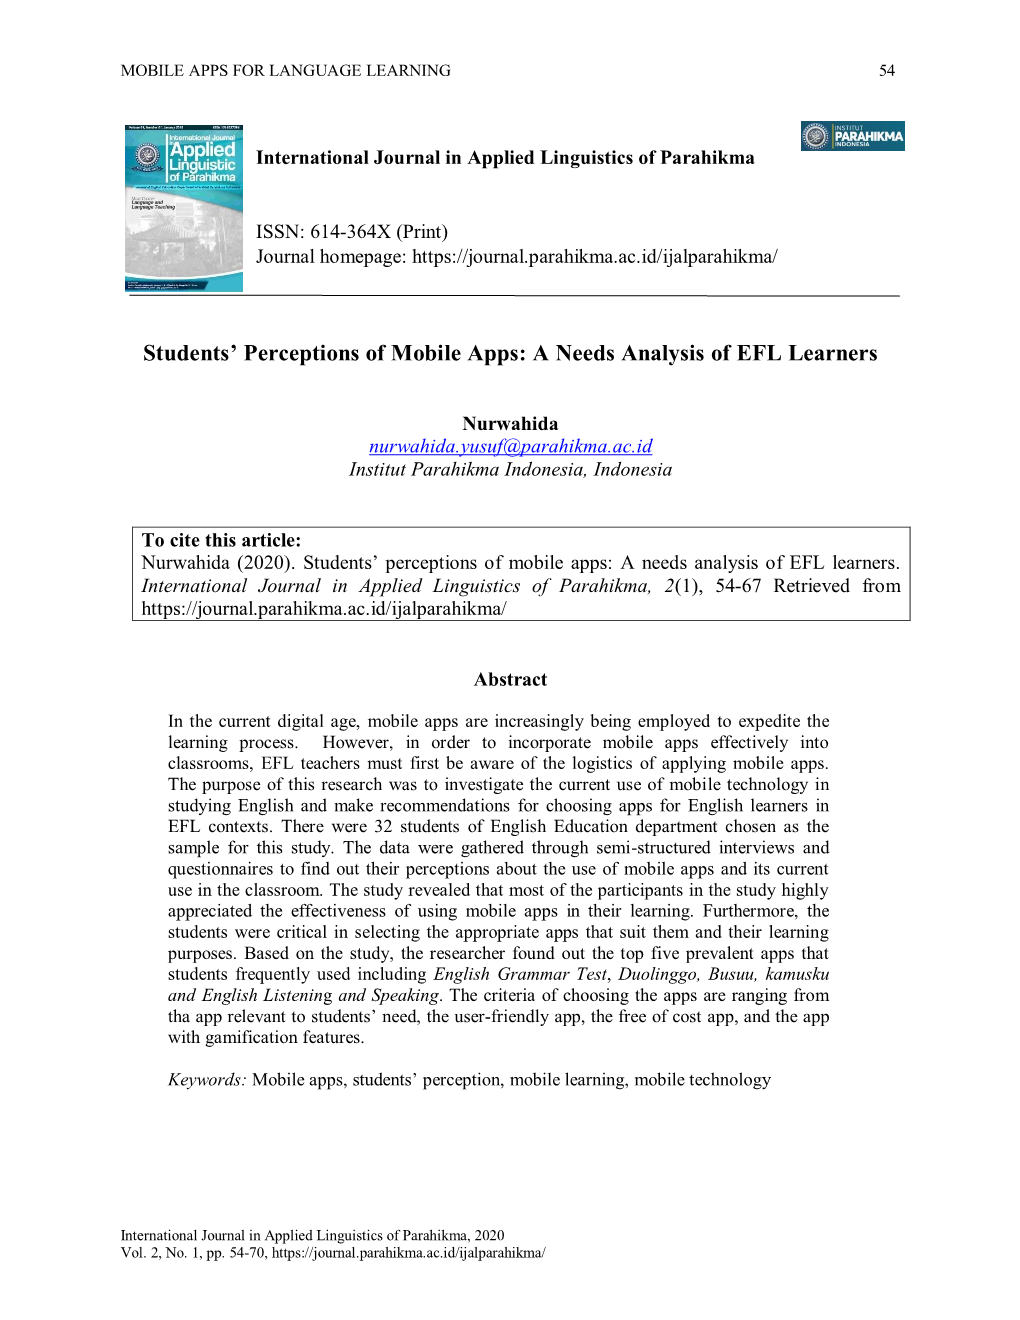 Students' Perceptions of Mobile Apps: a Needs Analysis of EFL Learners